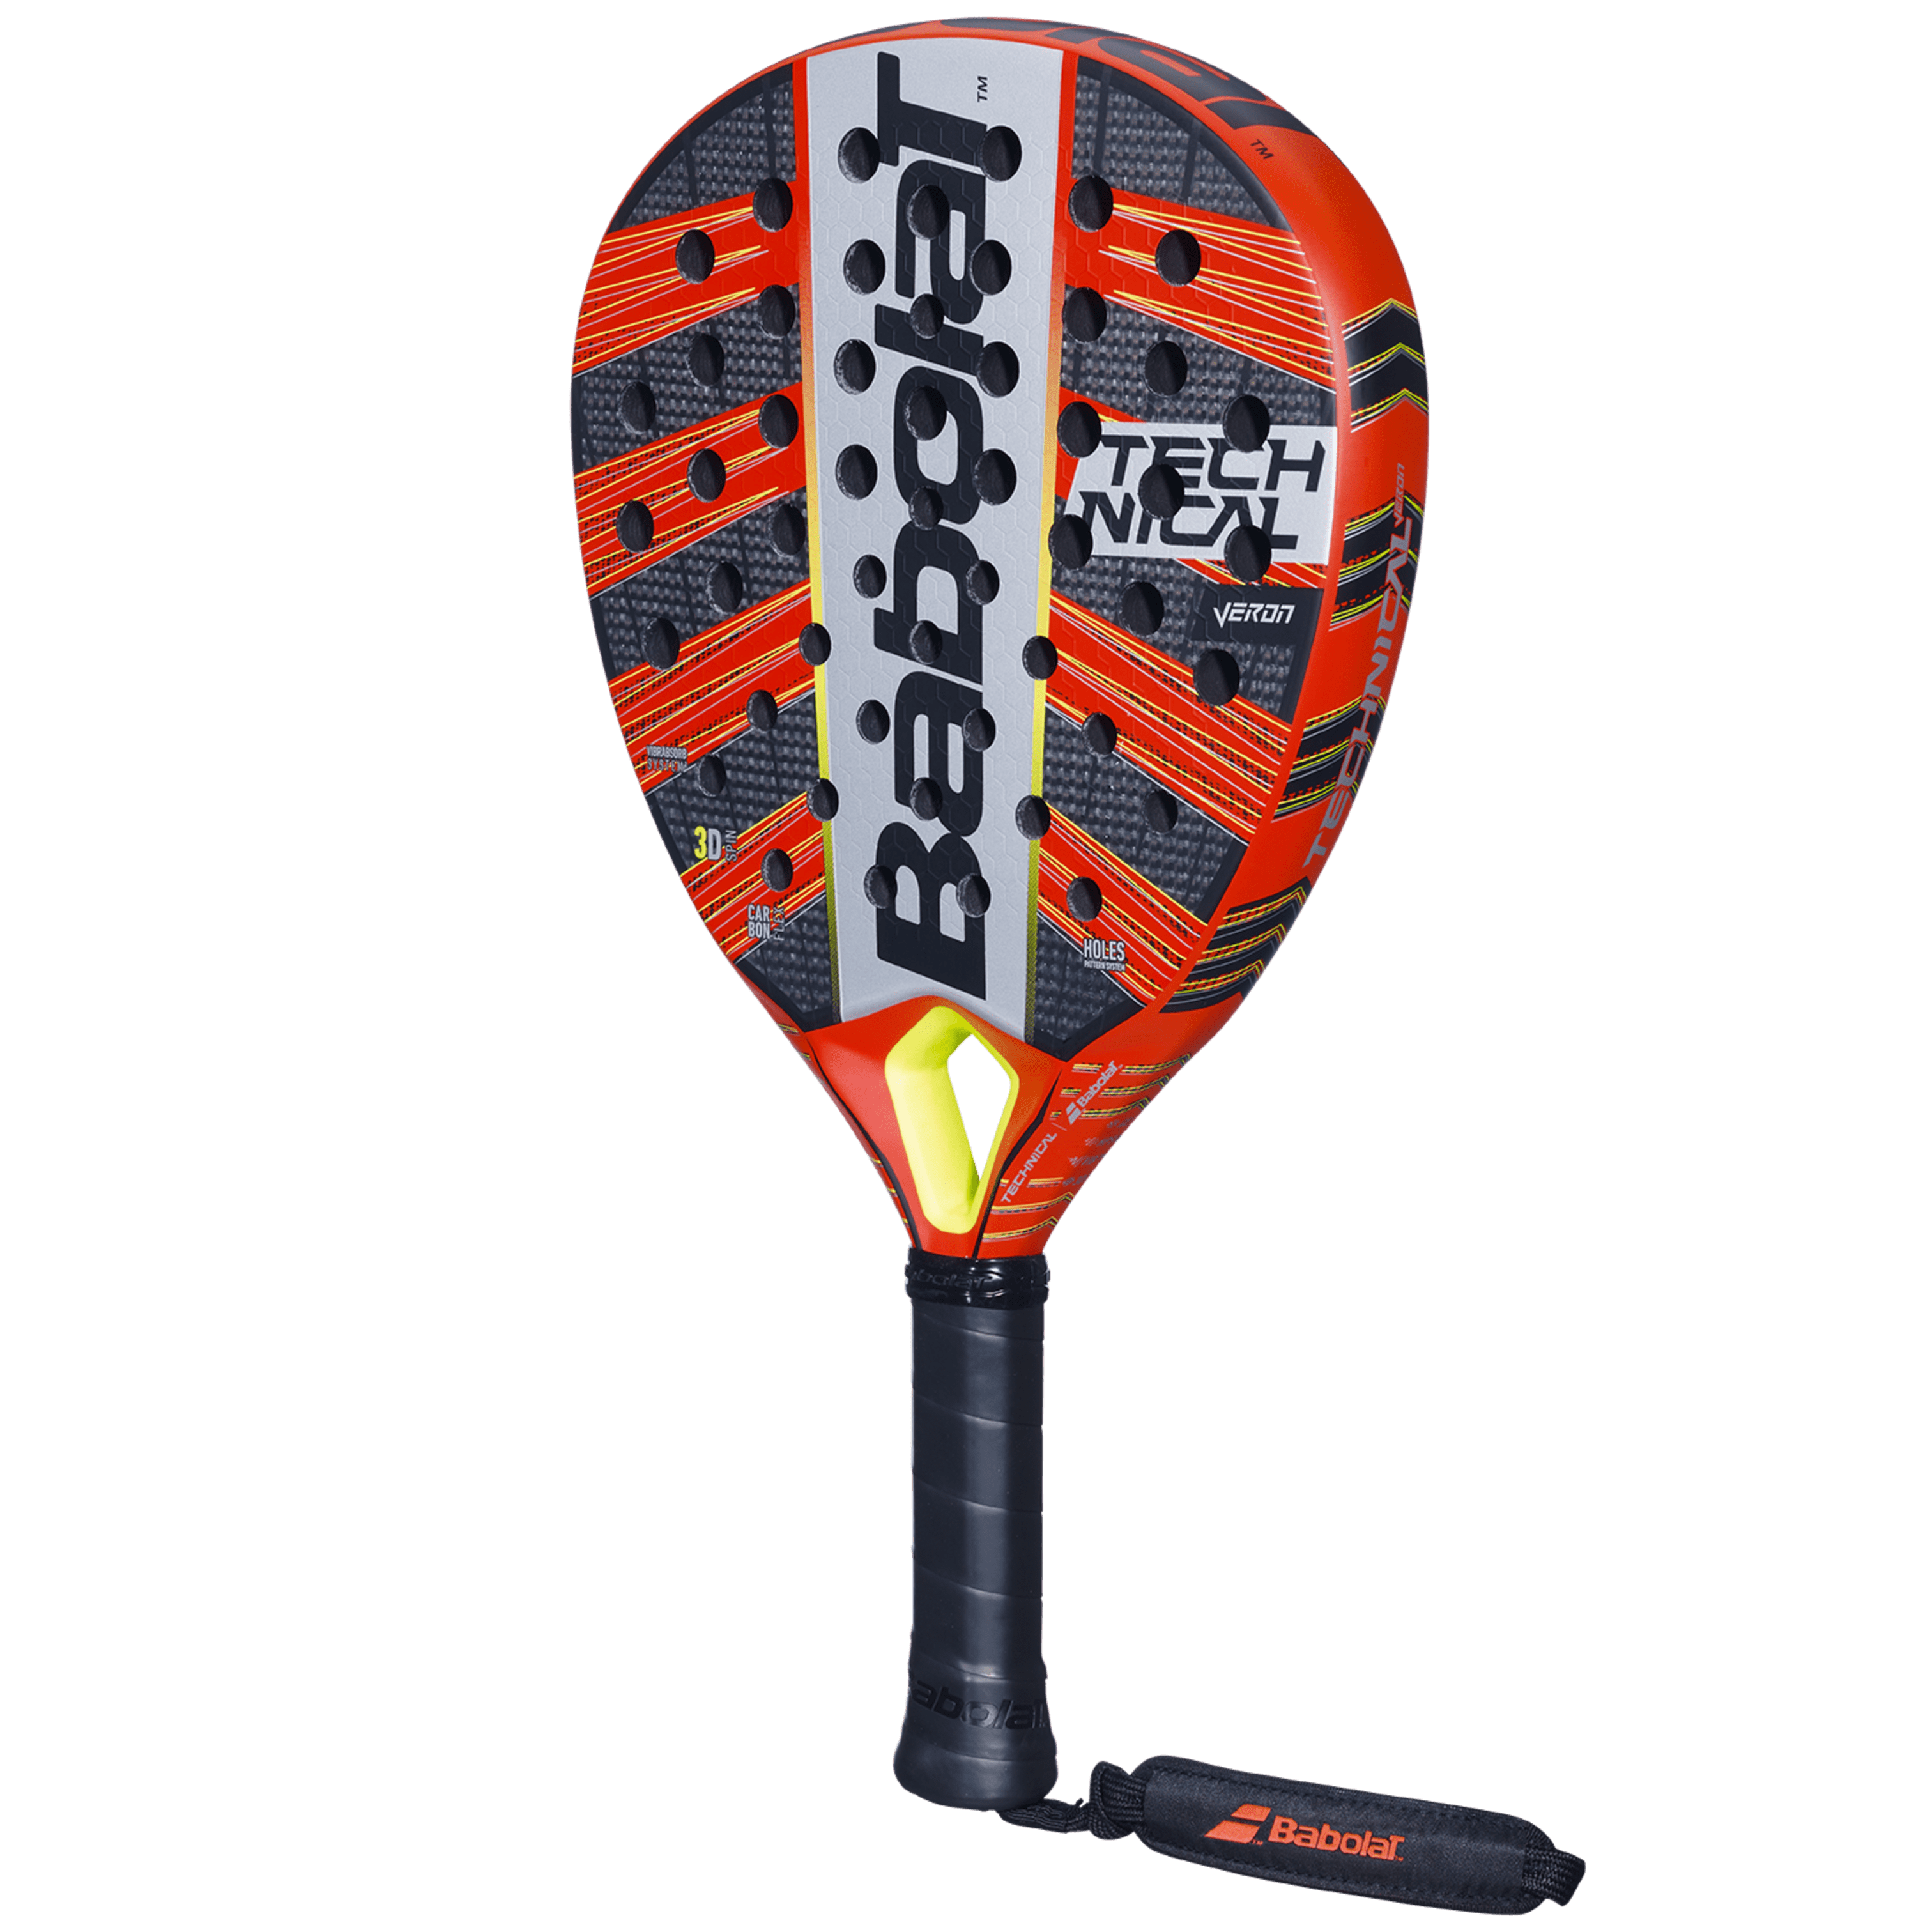 The Babolat Technical Veron: The perfect racket for dominating the court.